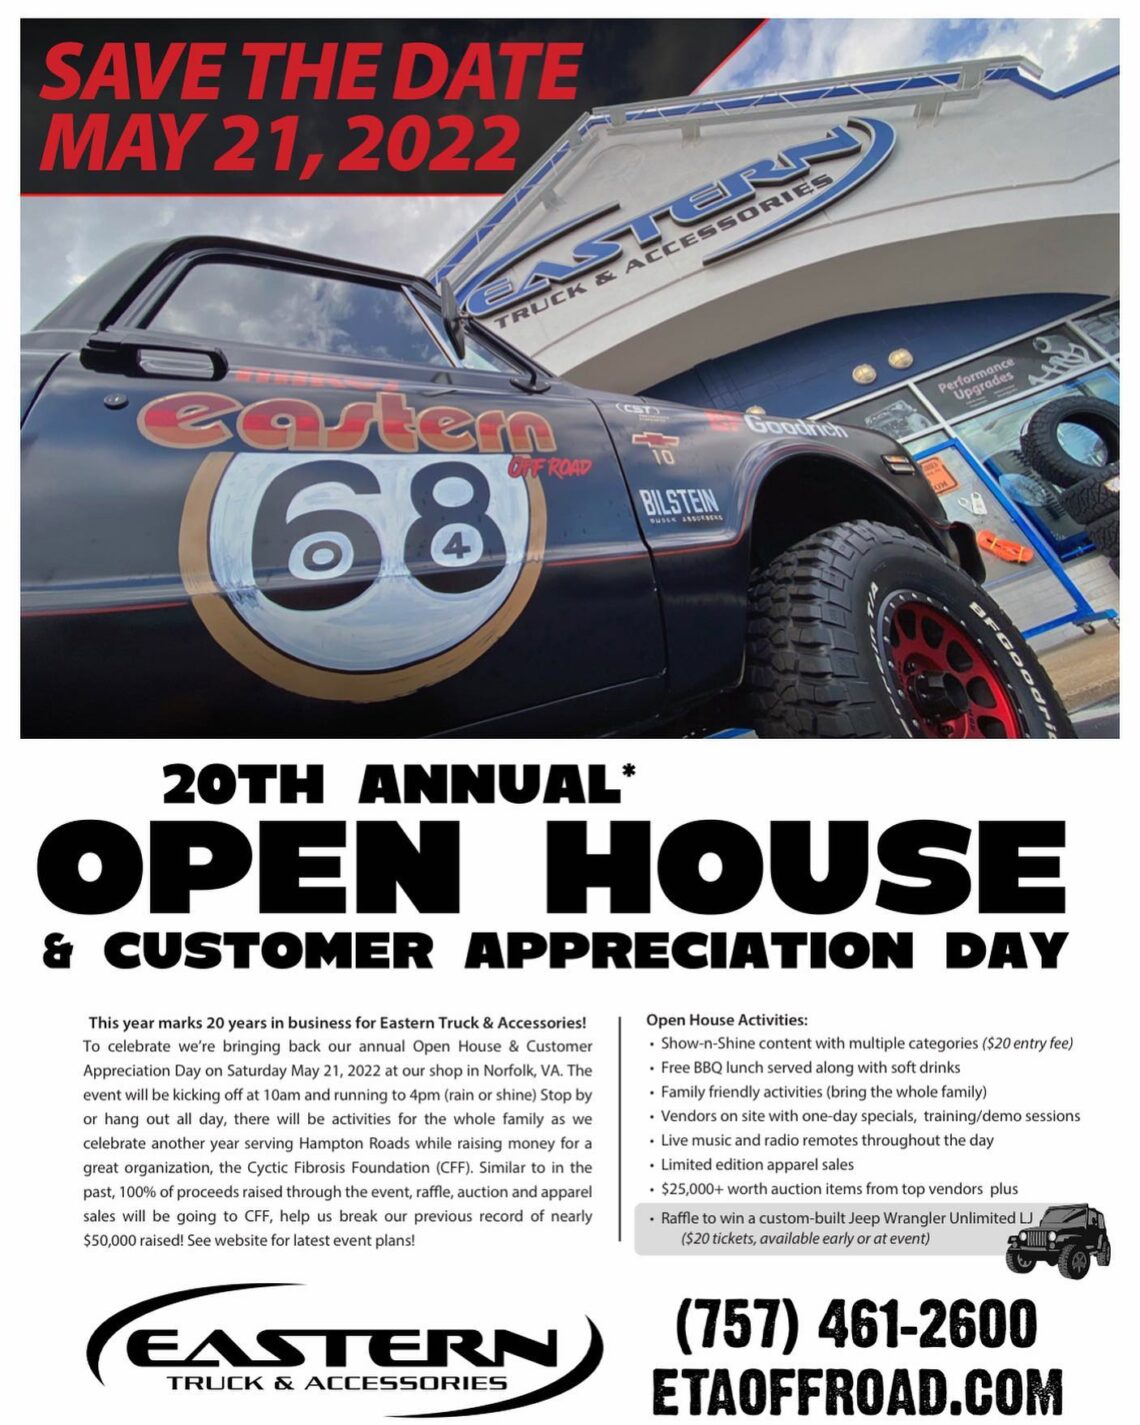 Eastern Truck & Accessories Open House